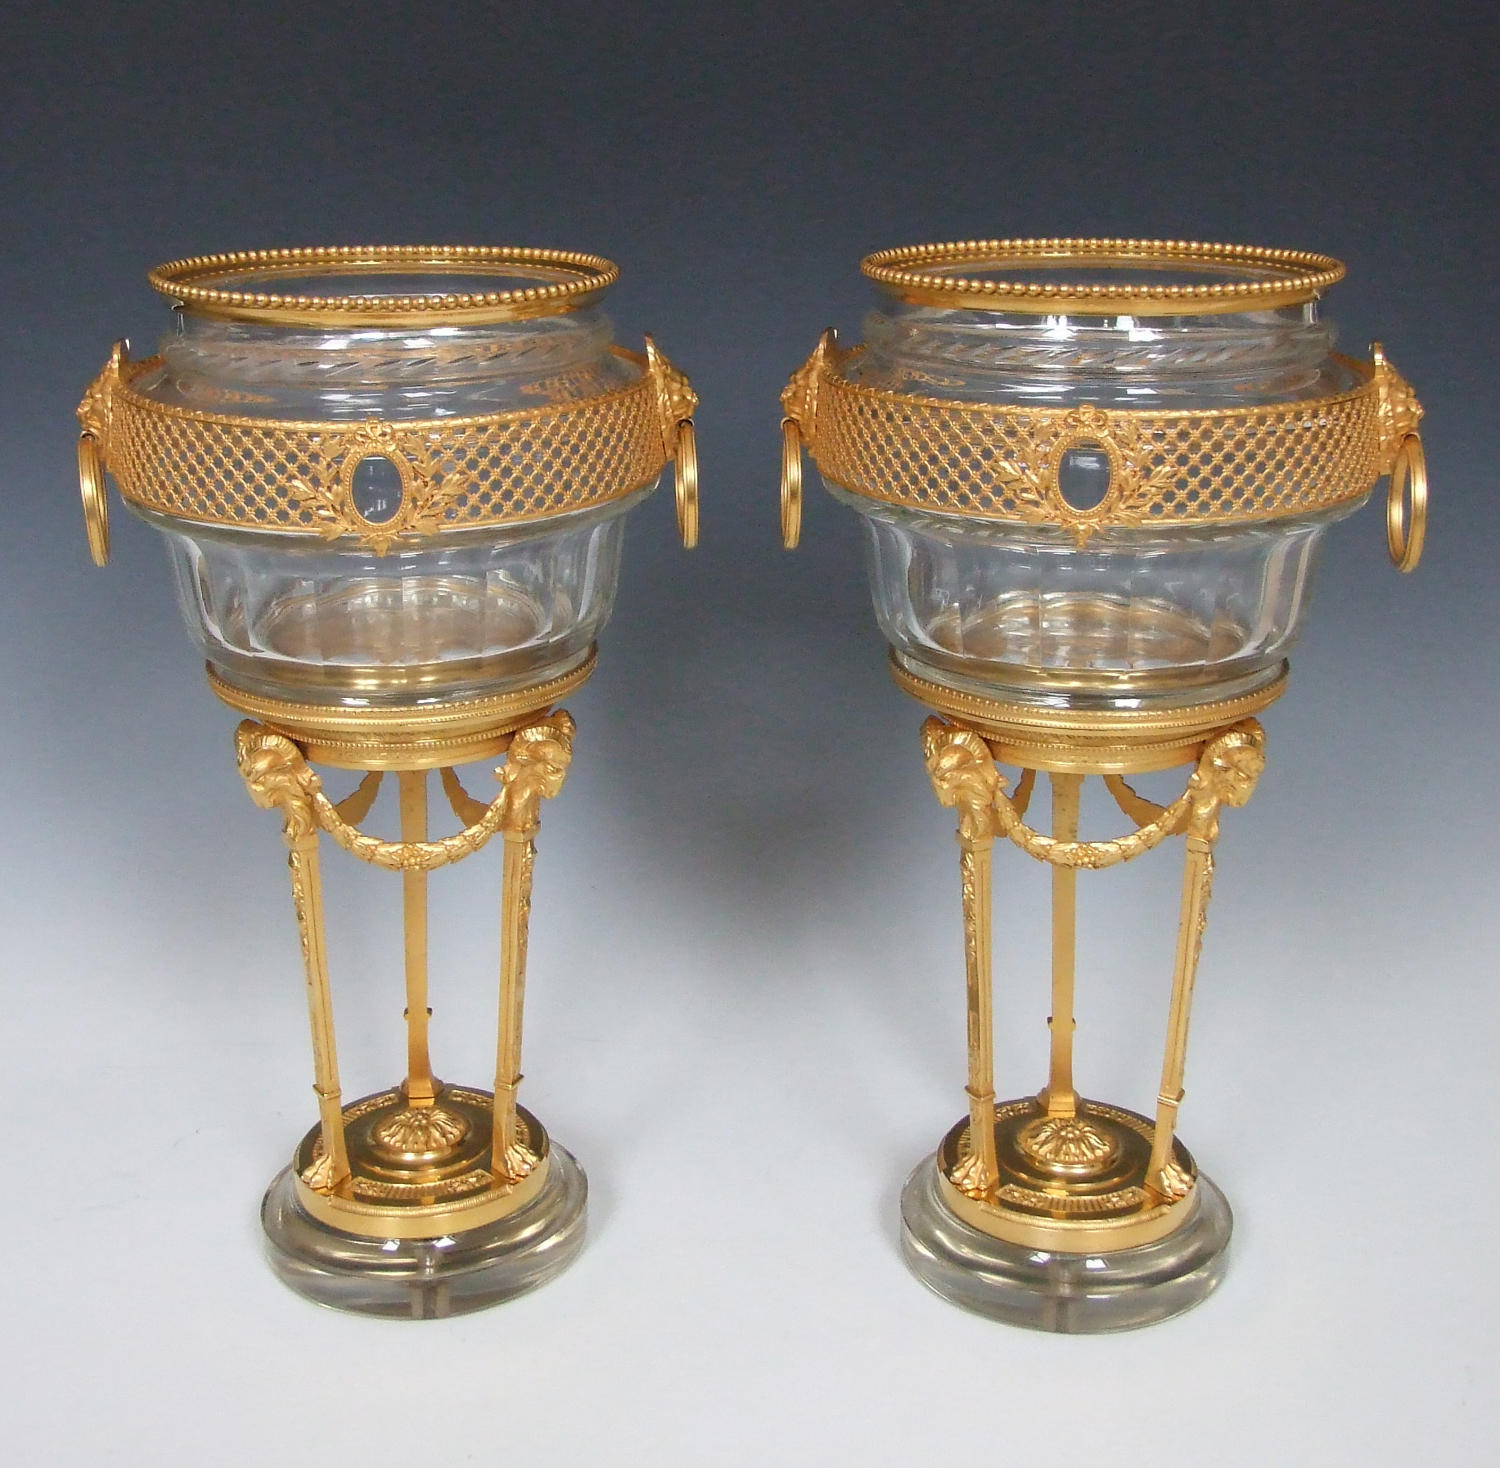 Exceptional pair of crystal glass cachepots on stands